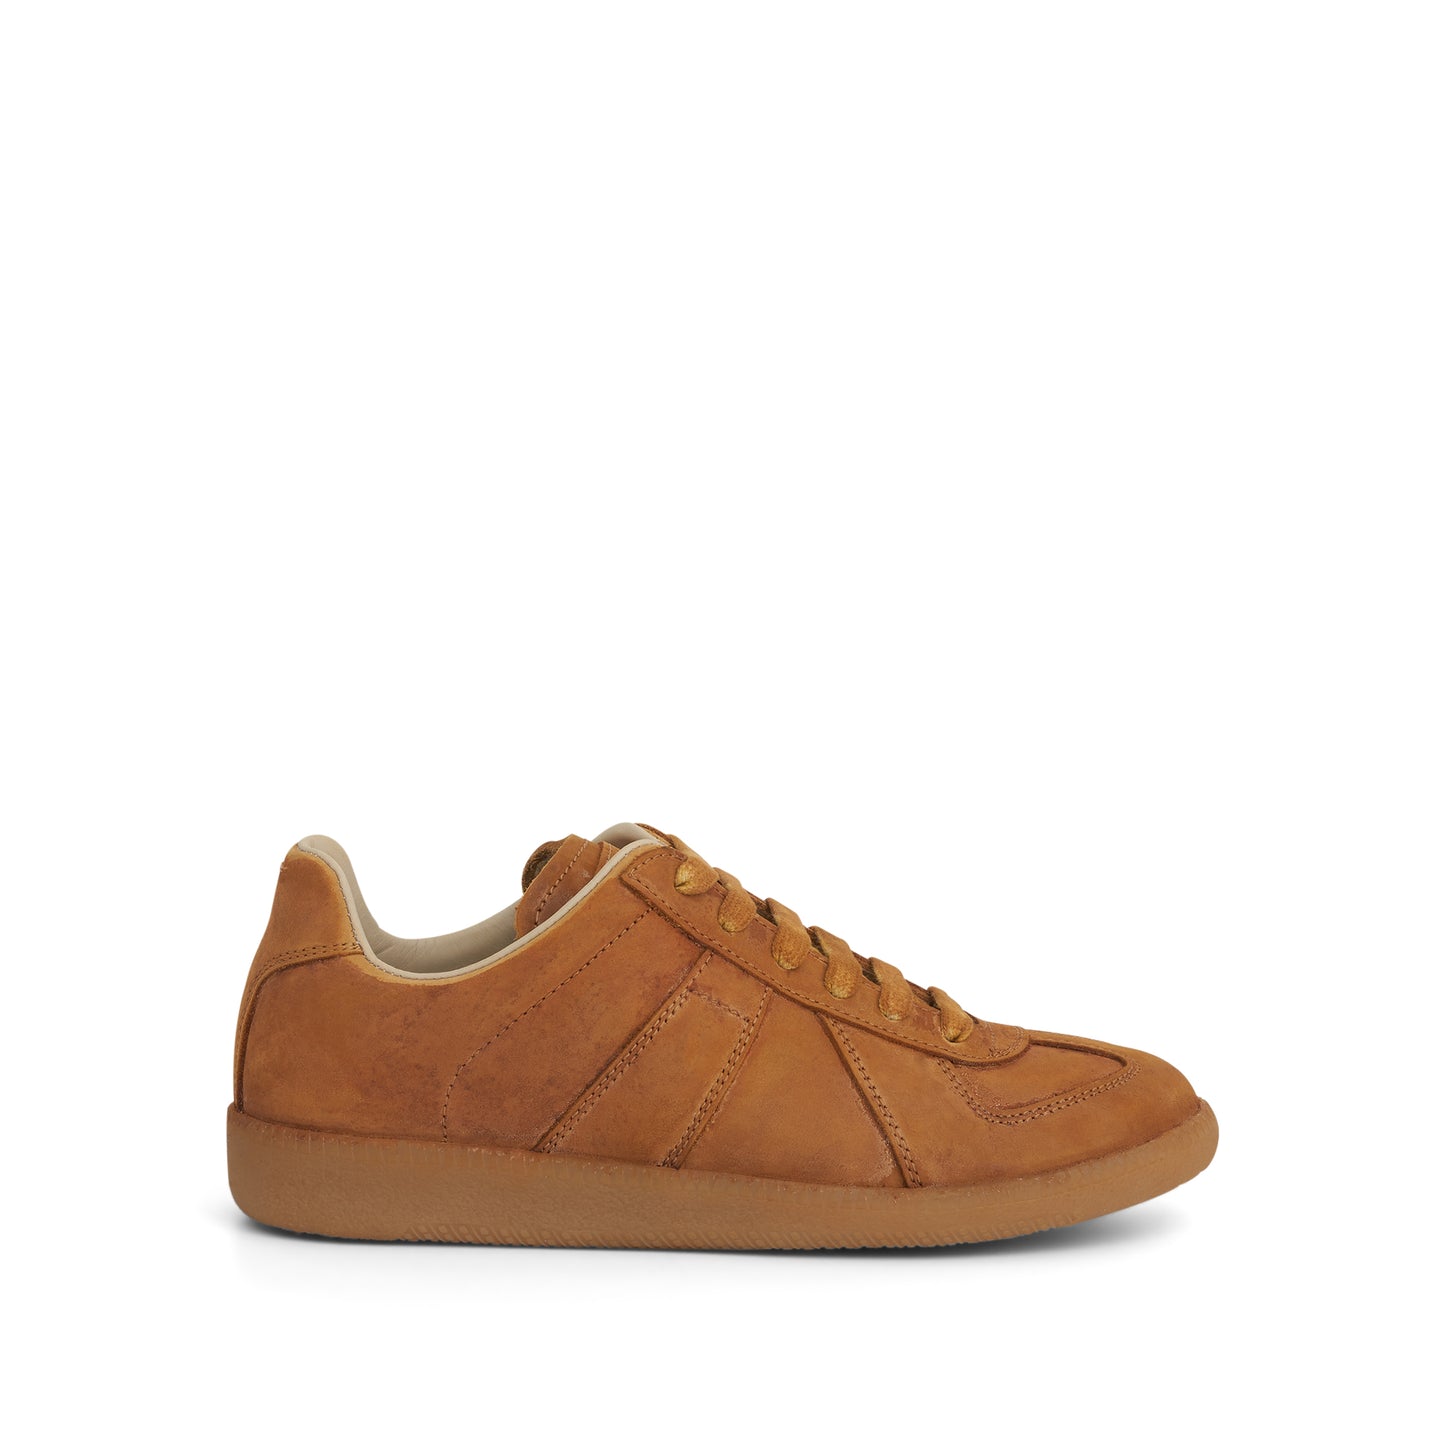 Replica Leather Sneakers in Old Camel